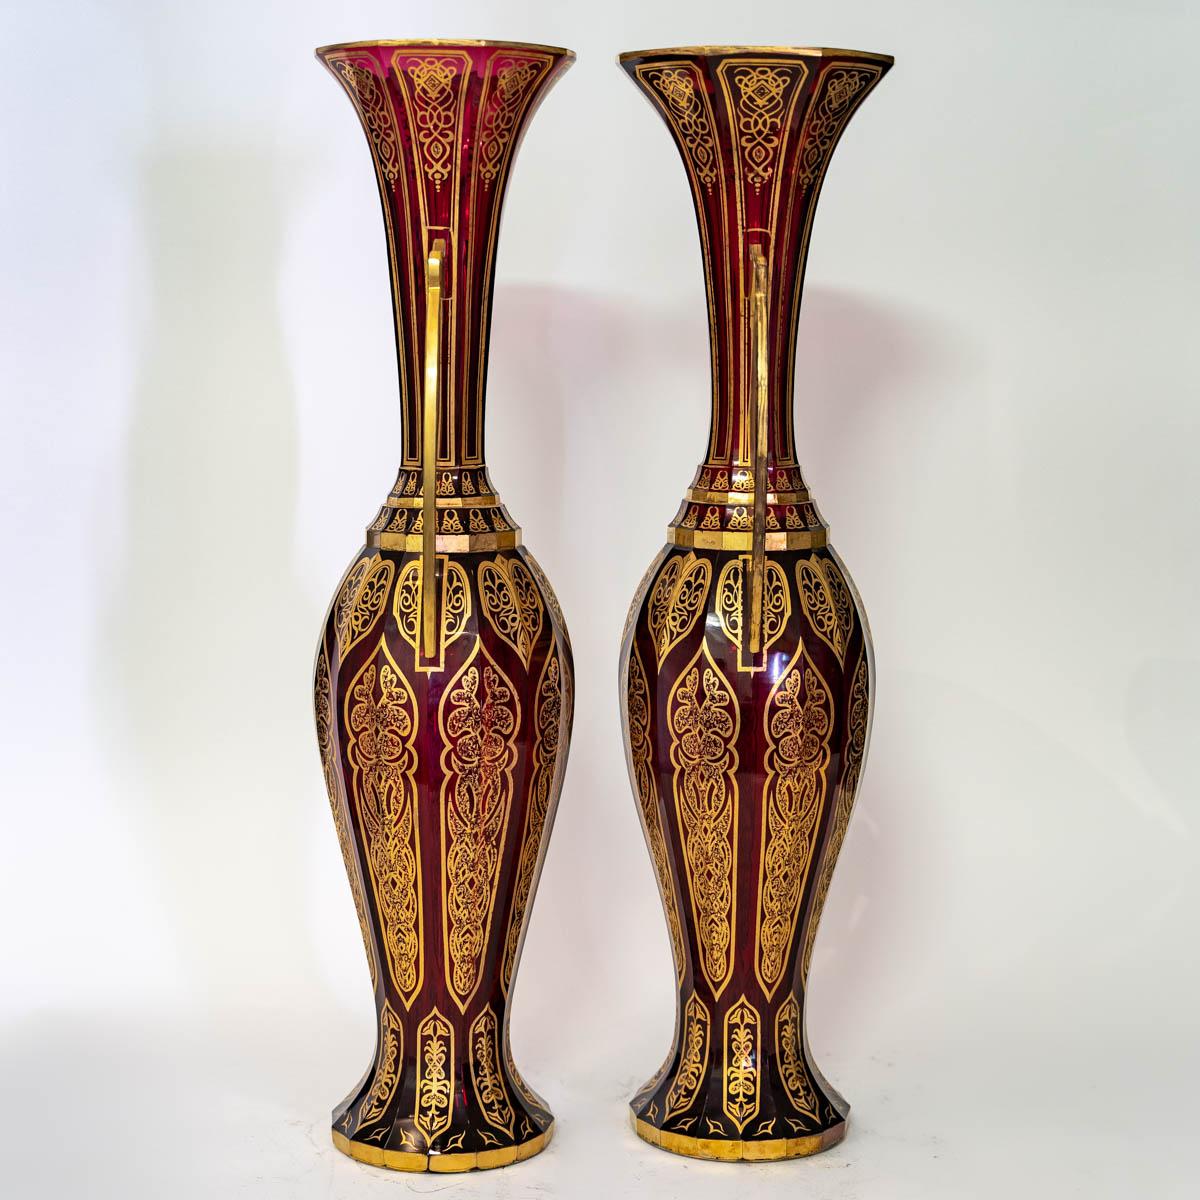 Pair of Bohemian Cut Crystal Vases in Ruby Red and Gold, 19th Century For Sale 5